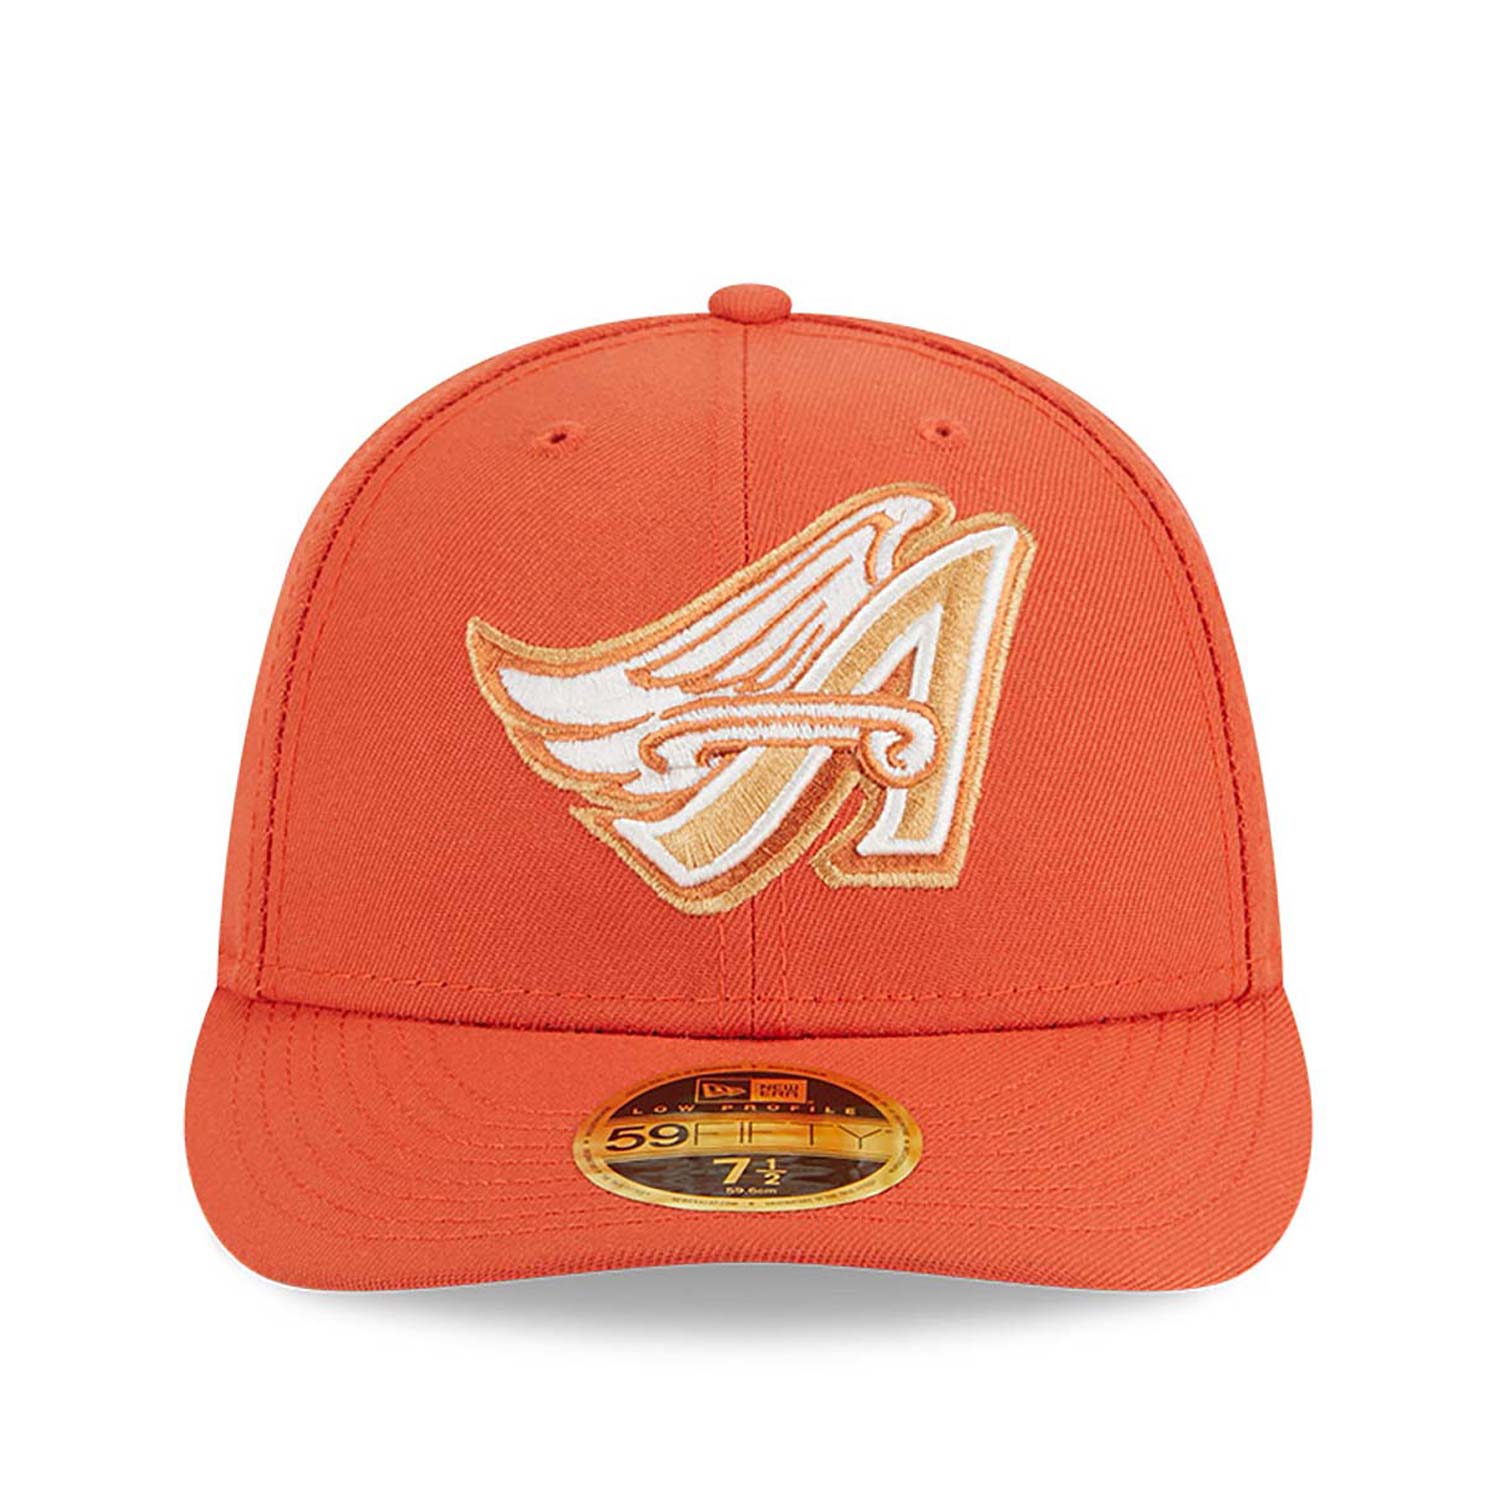 Anaheim Angels Repreve Orange Low Profile 59FIFTY Fitted Cap